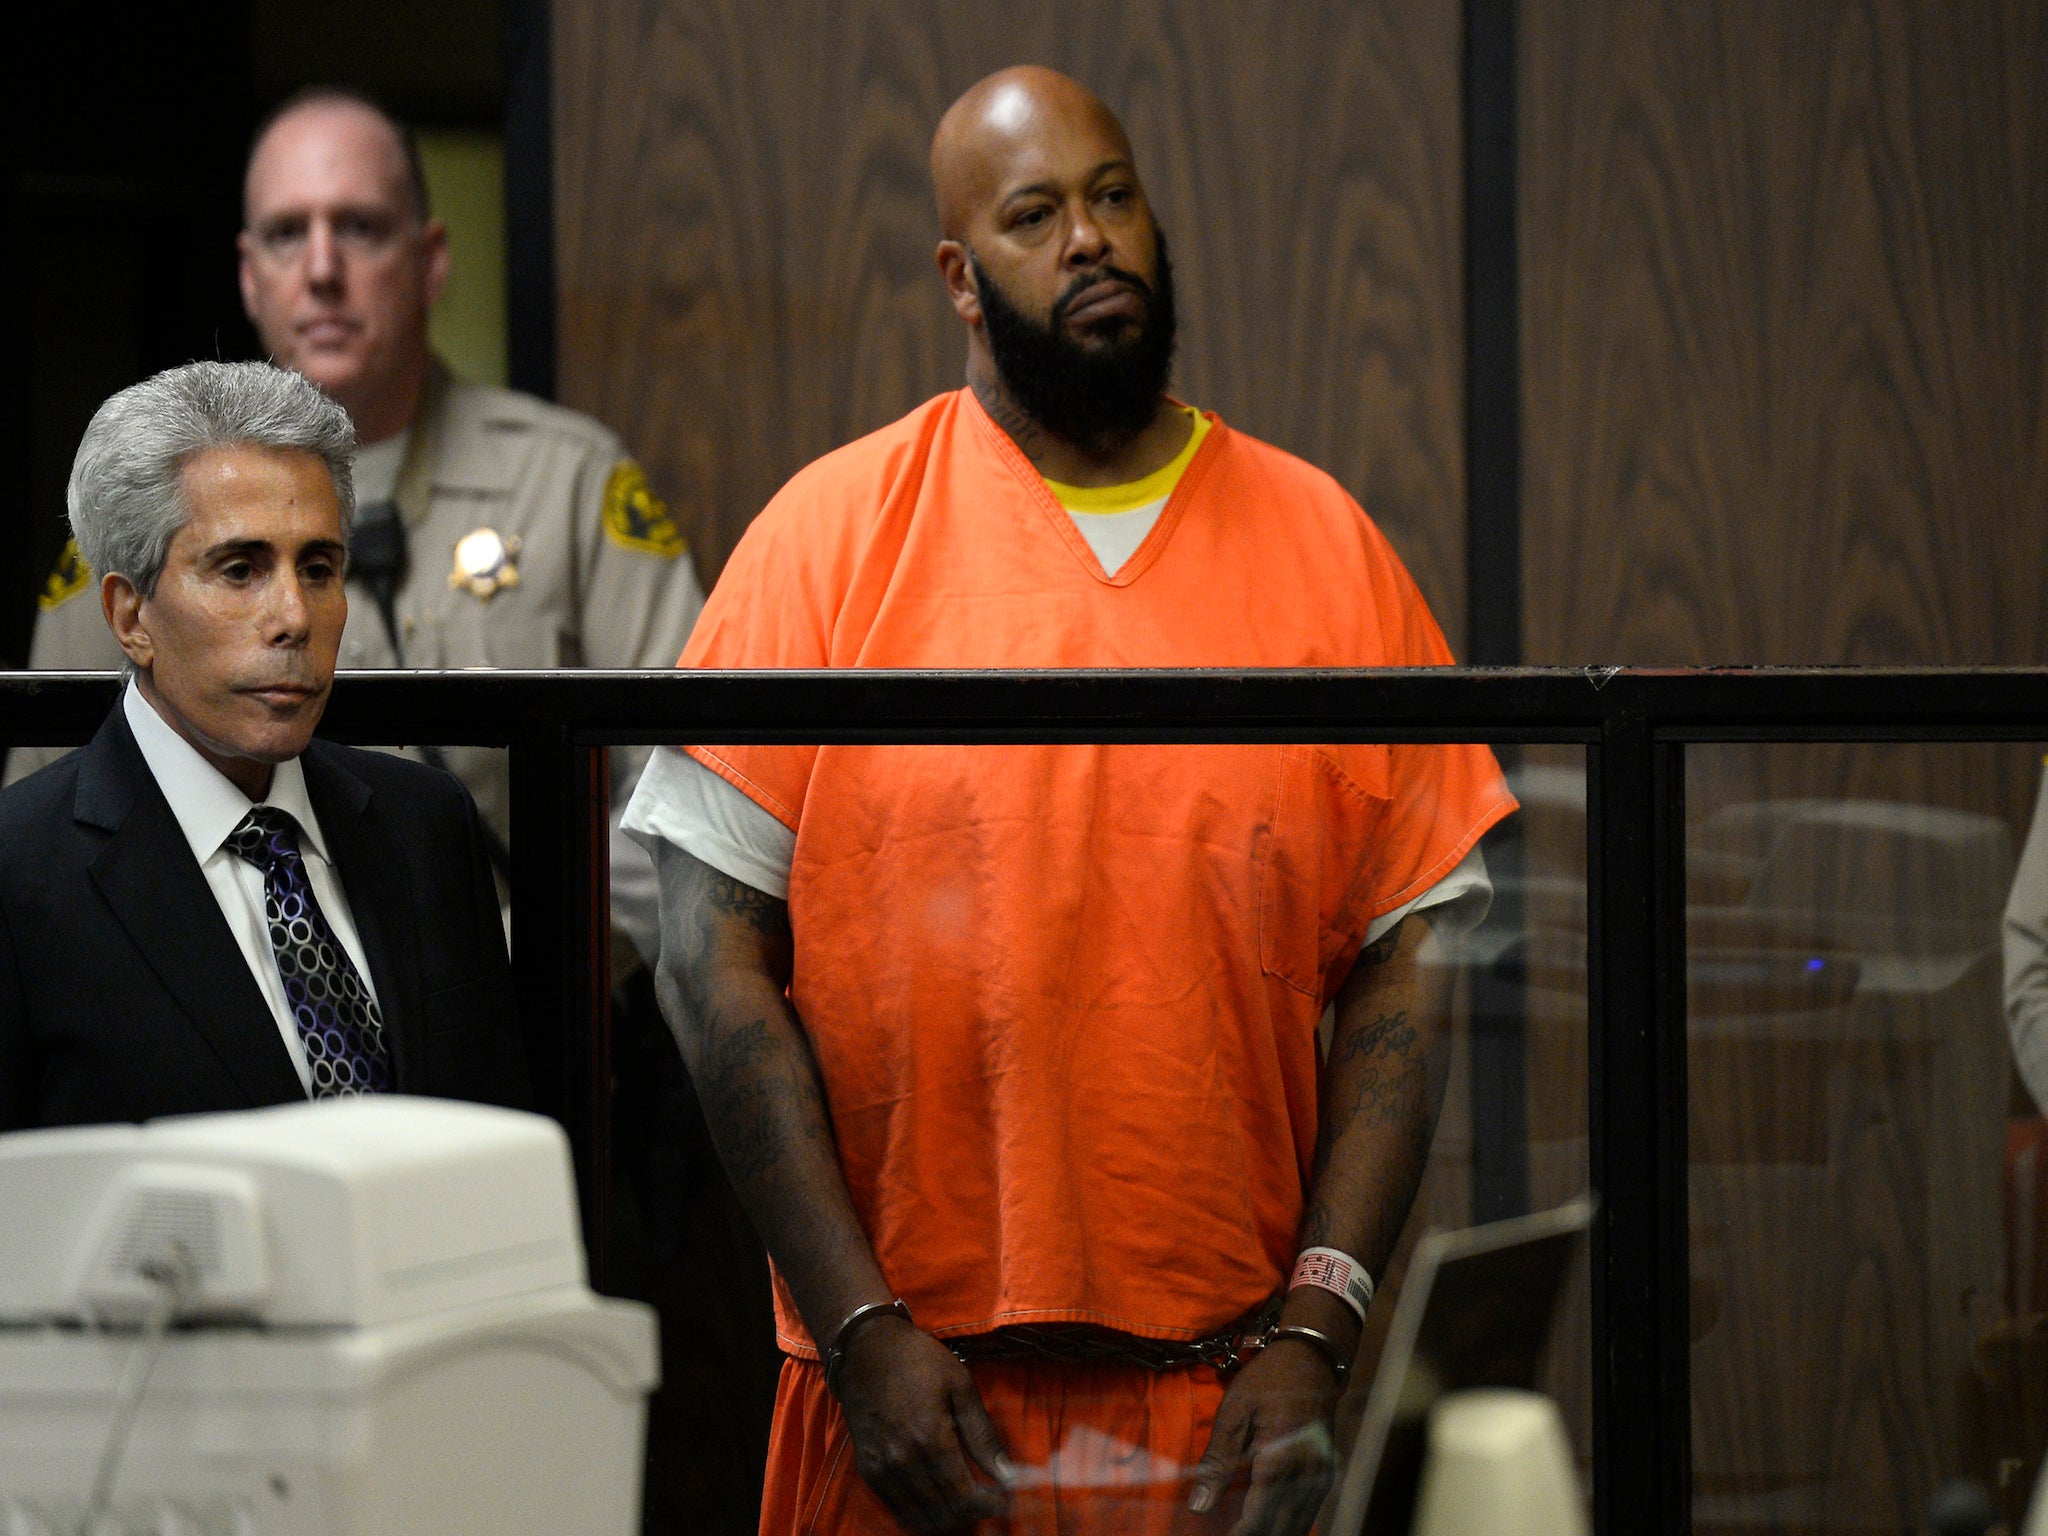 Suge Knight has denied the allegations levelled at him